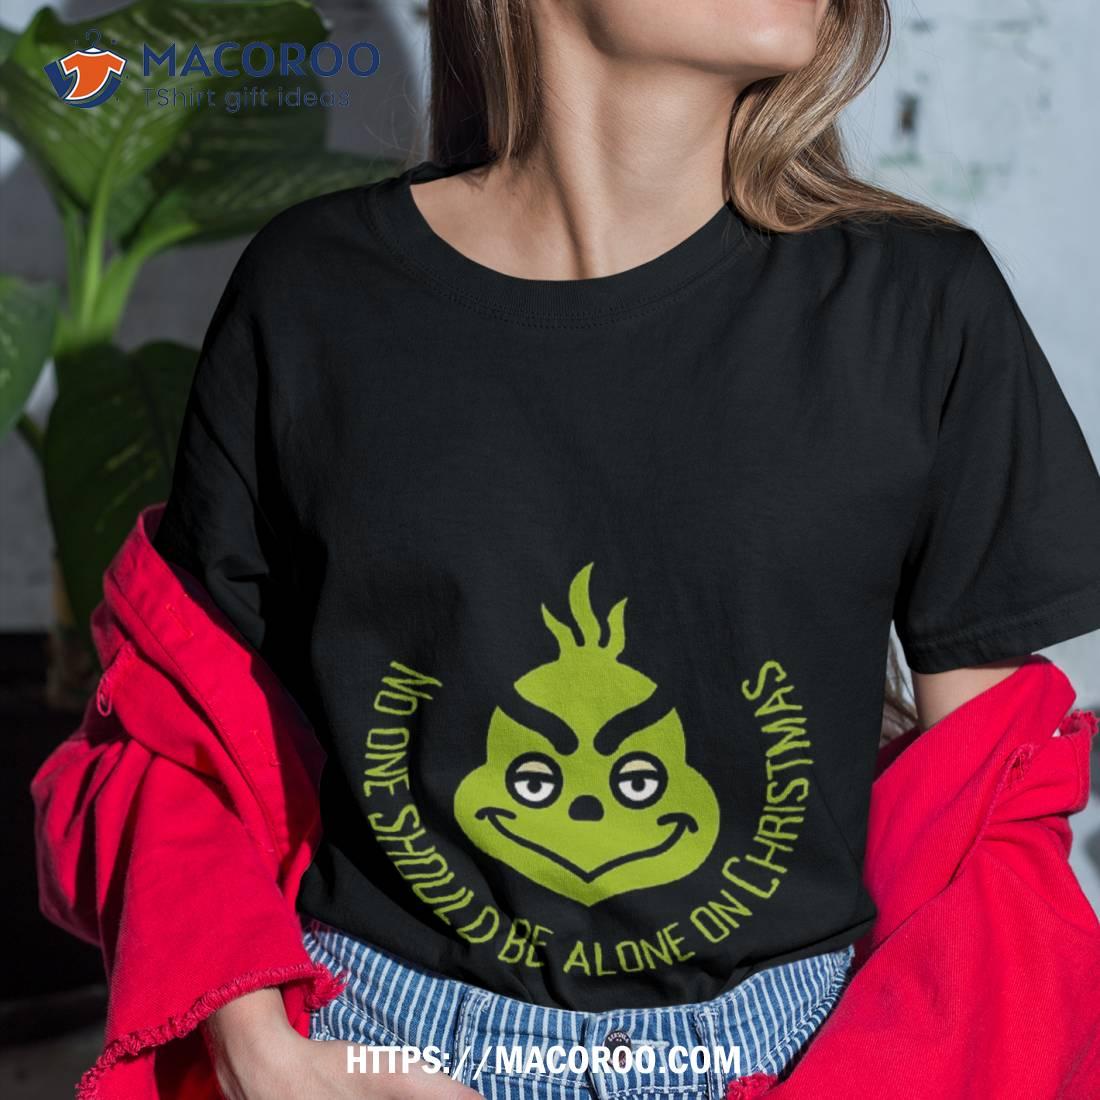 https://images.macoroo.com/wp-content/uploads/2023/08/dr-seuss-sly-grinch-face-shirt-the-grinch-2018-tshirt.jpg